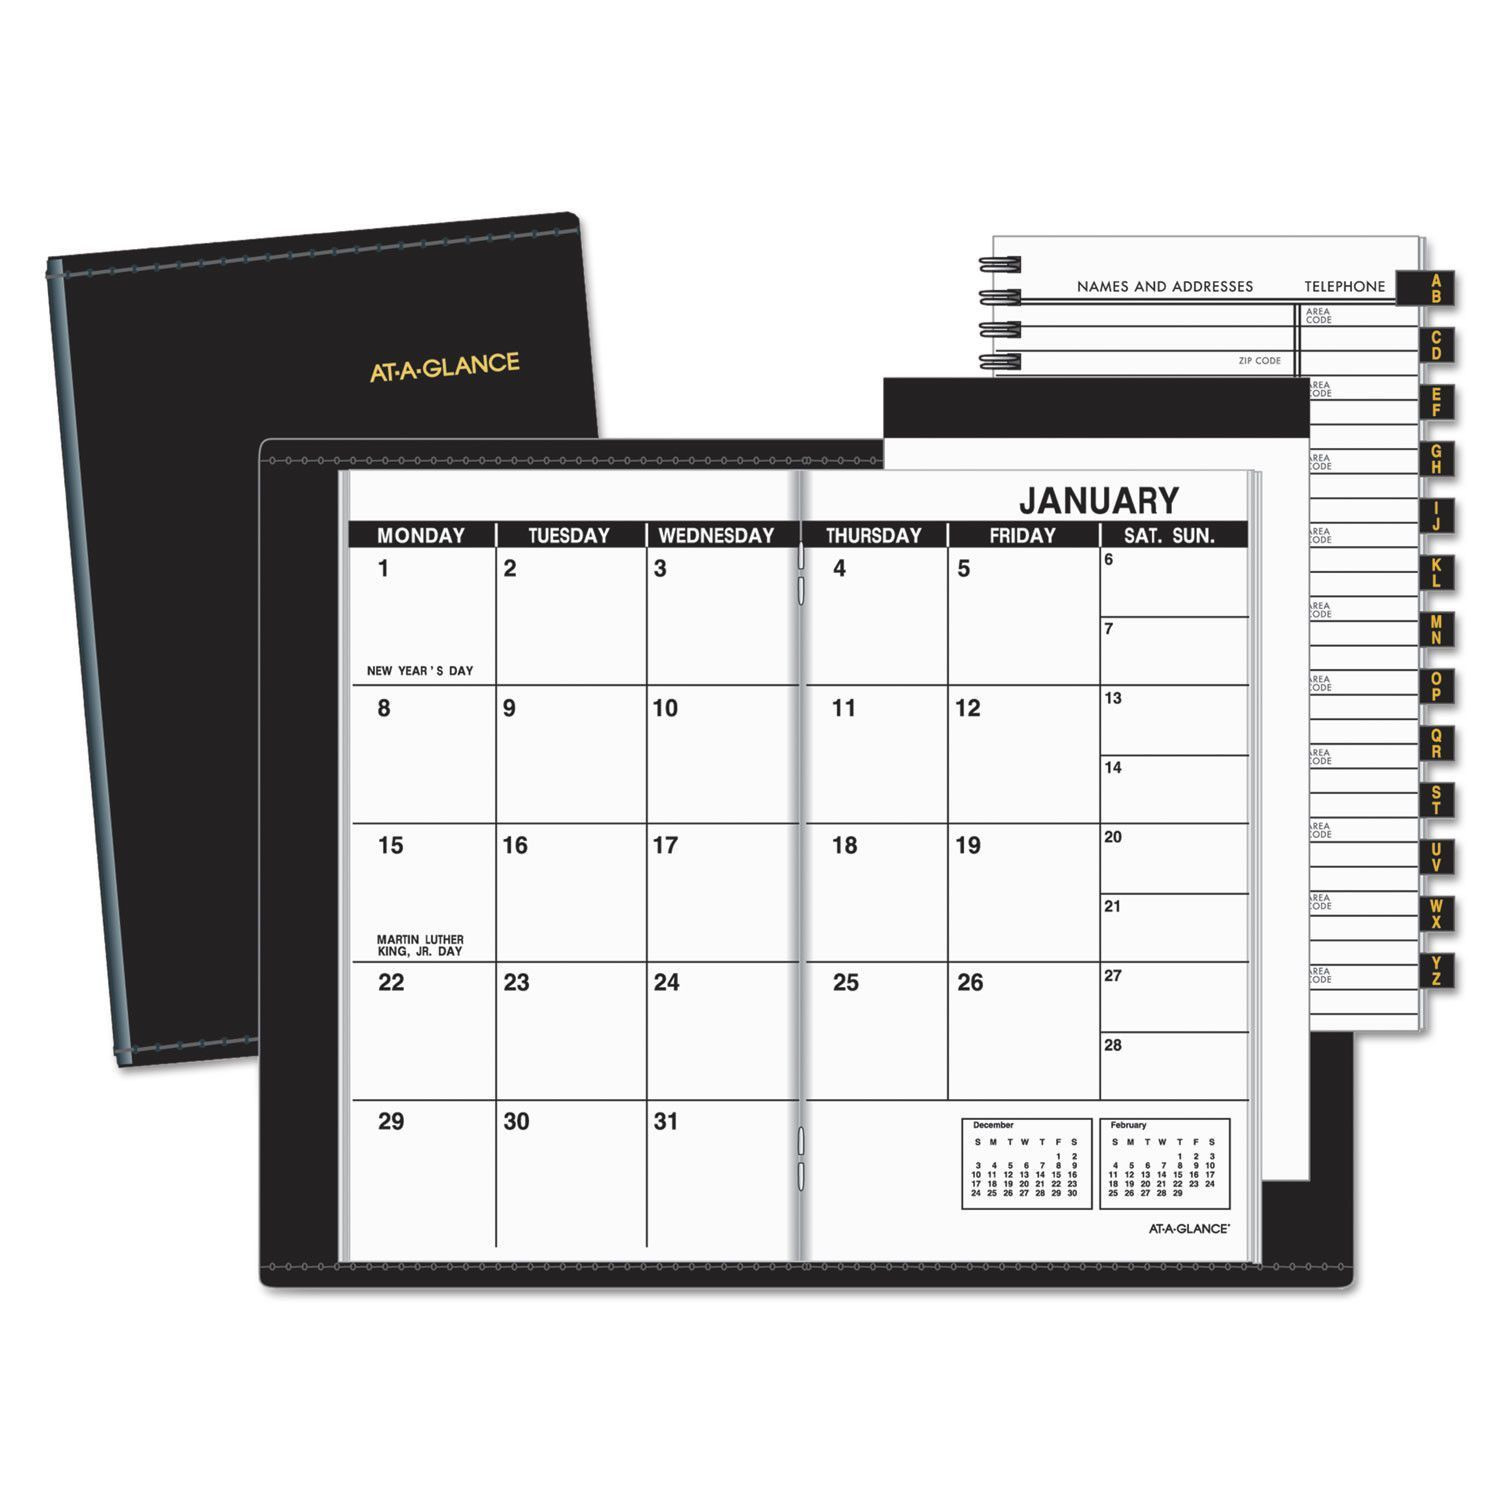 At A Glance Monthly Planner - Free Download Printable-Free Pocket Printable Calendar